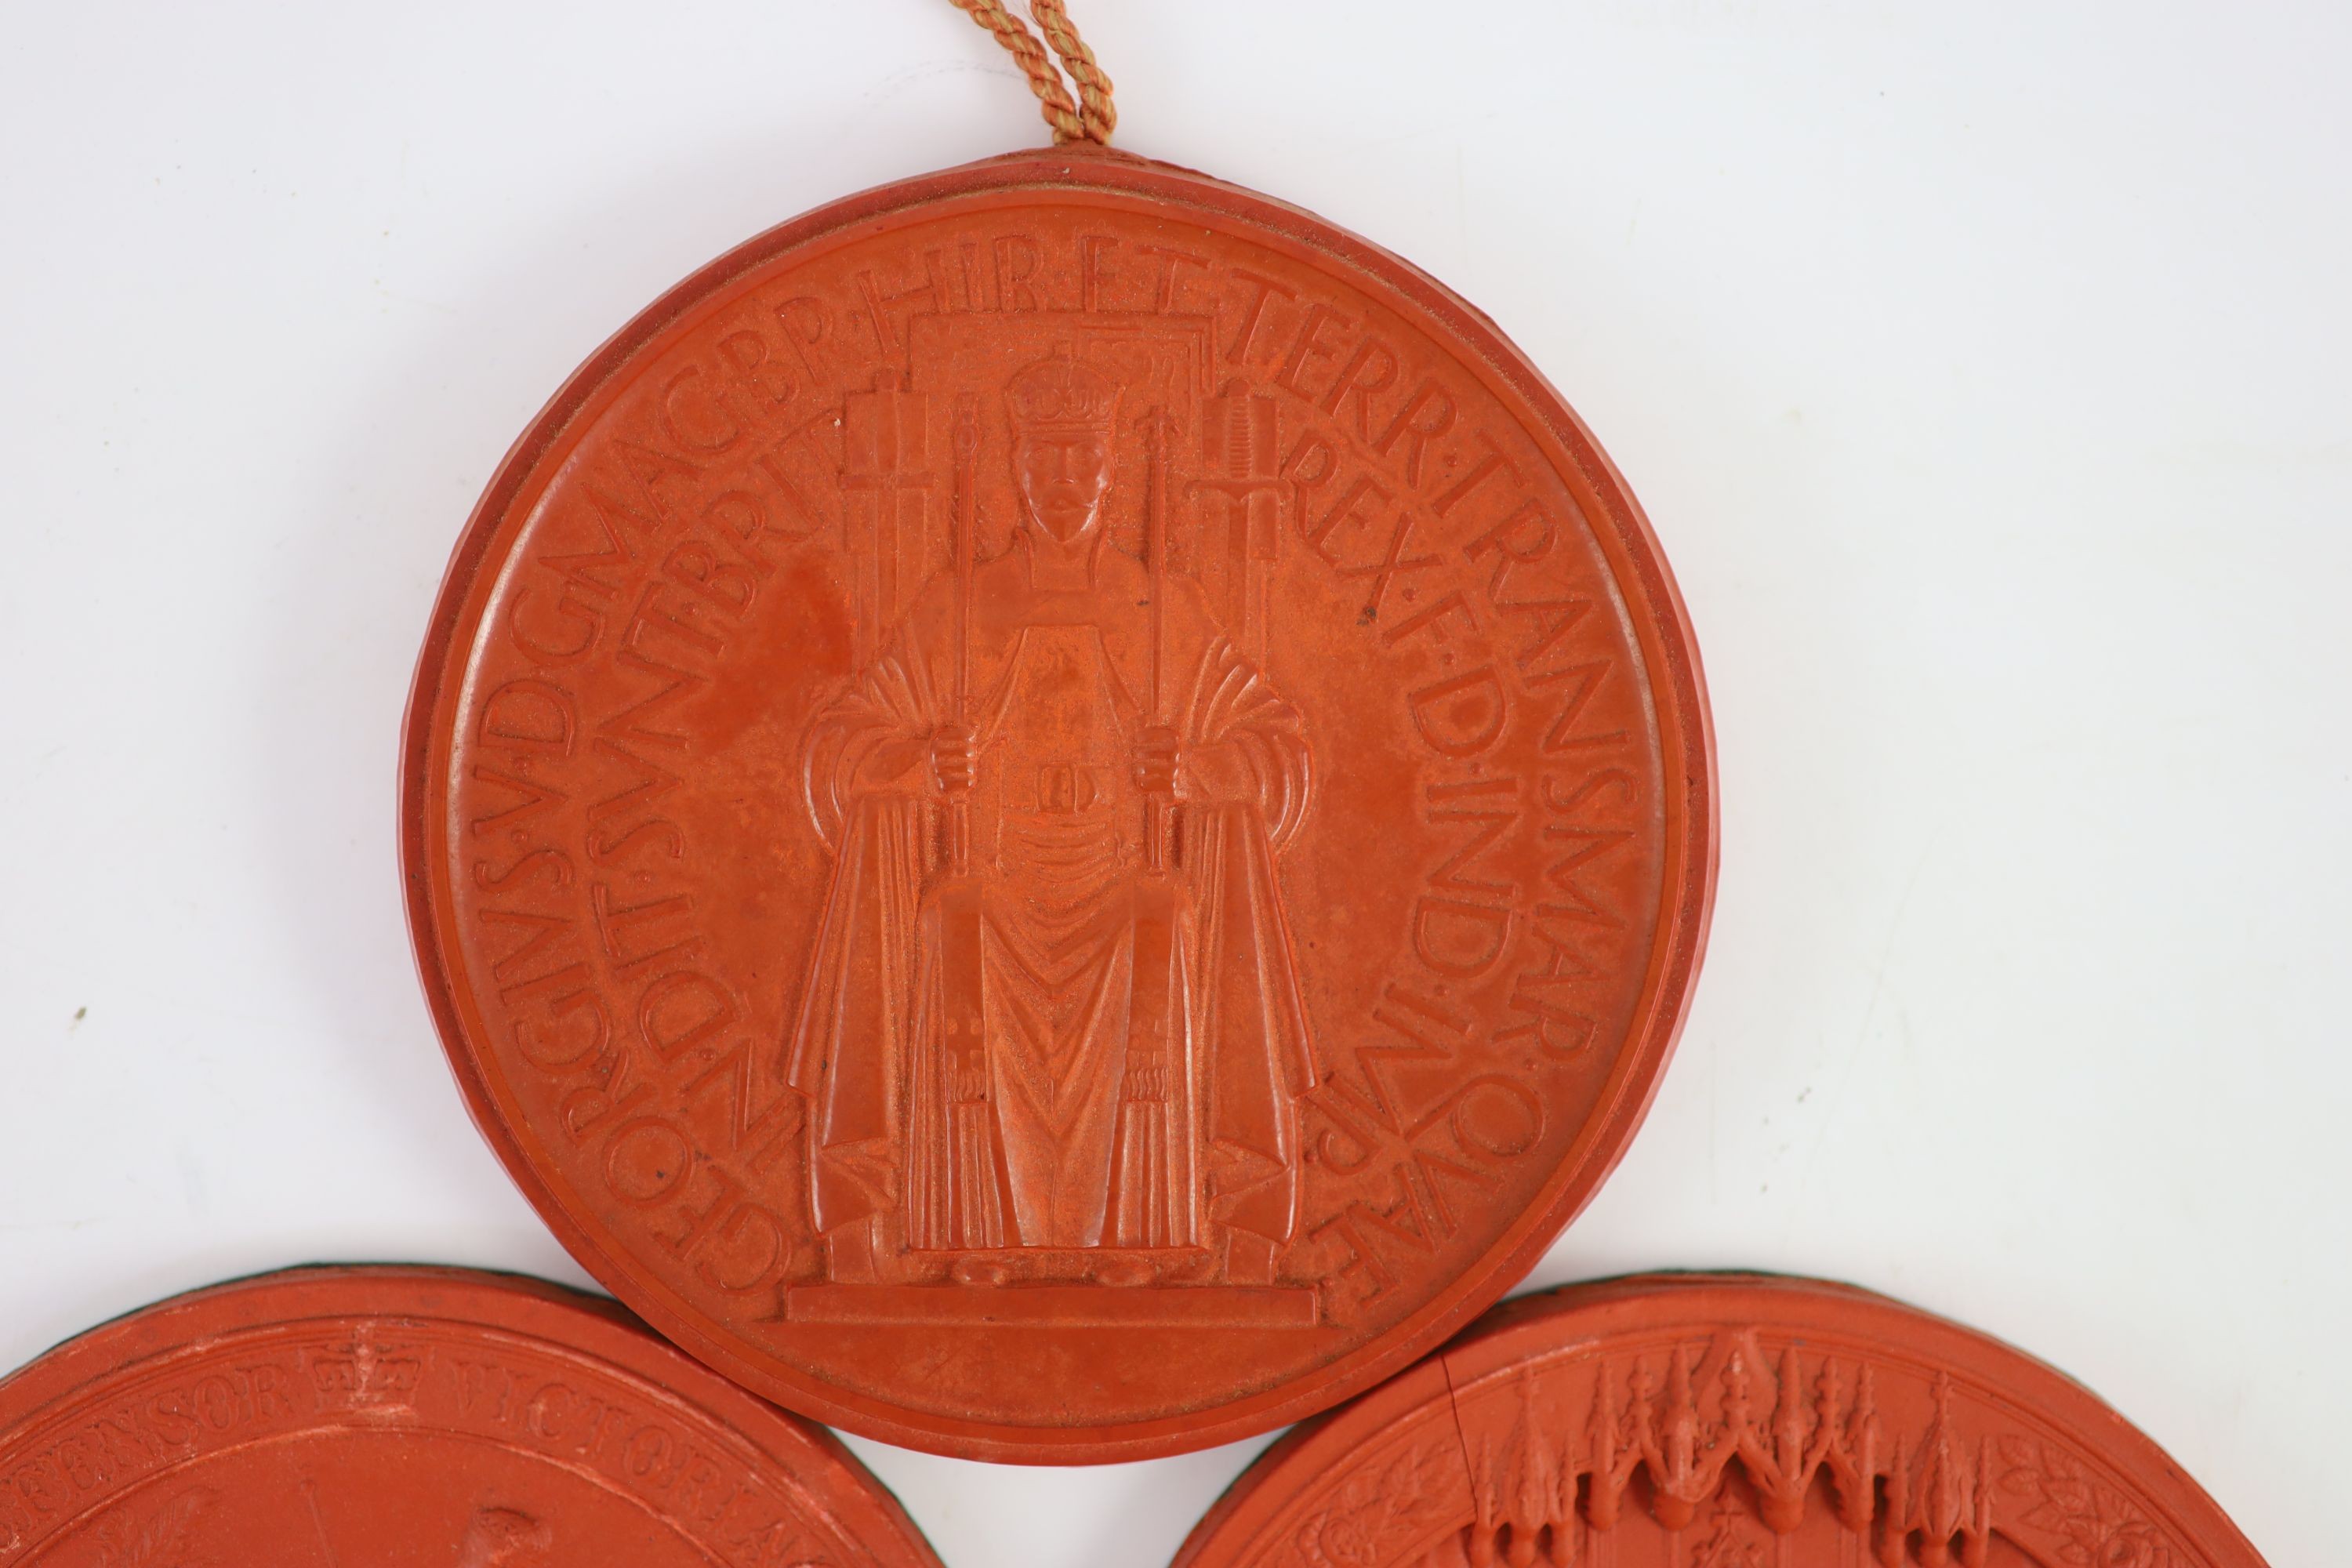 Three red wax Great Seals, two Queen Victorian Great Seals of the Realm, and a George V seal, 16.5 and 16 cm diameter